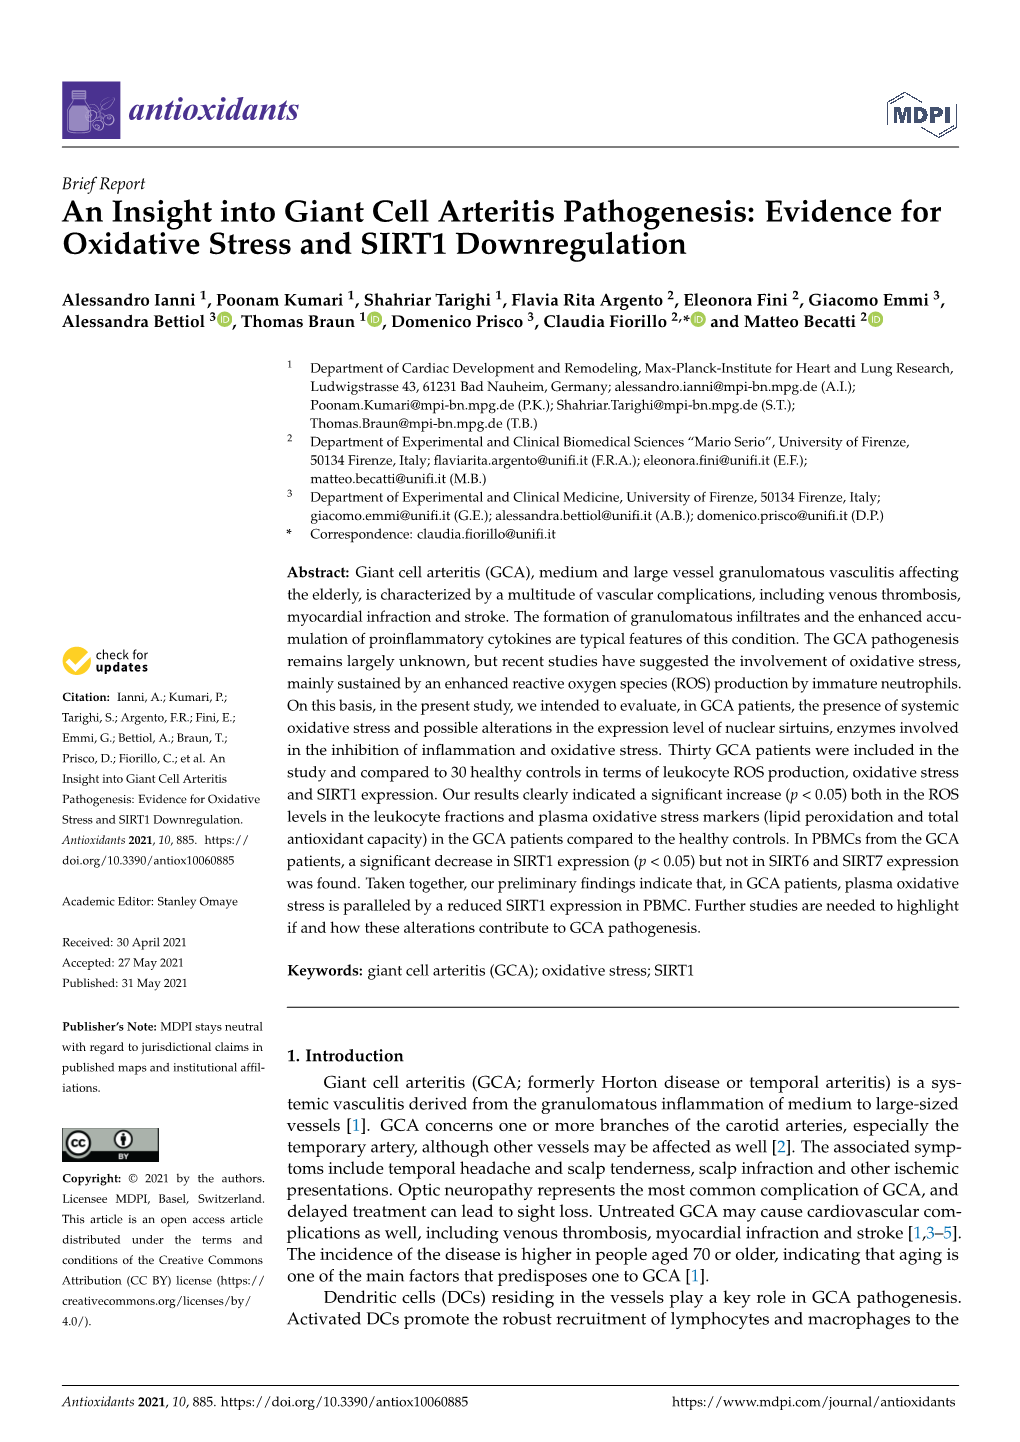 Evidence for Oxidative Stress and SIRT1 Downregulation